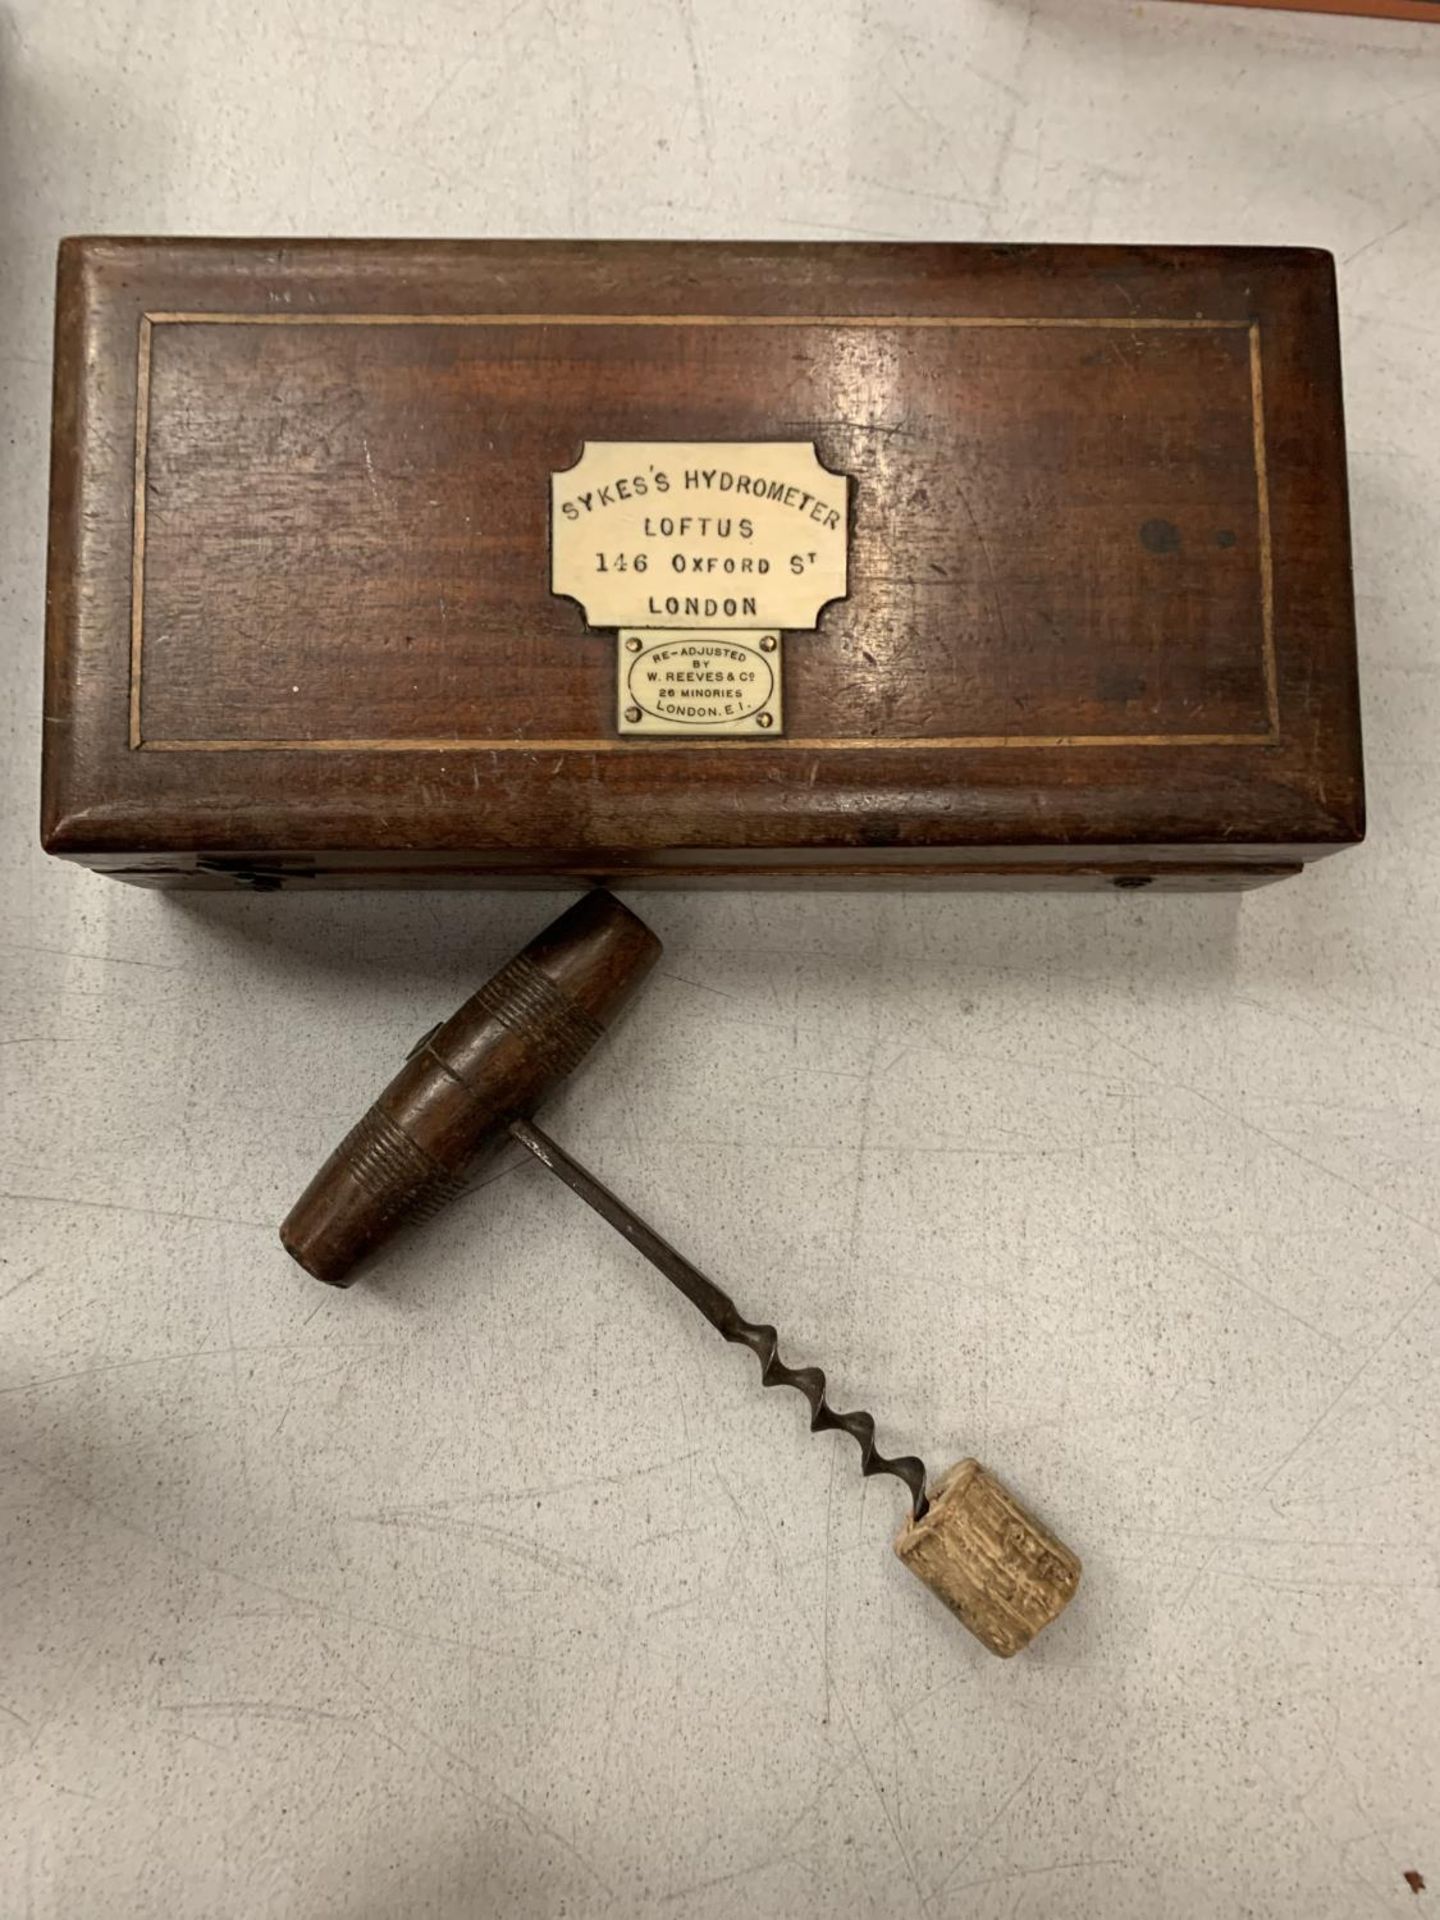 A BOXED SYKES HYDROMETER LOFTUS 146 OXFORD ST LONDON AND A VINTAGE CORK SCREW